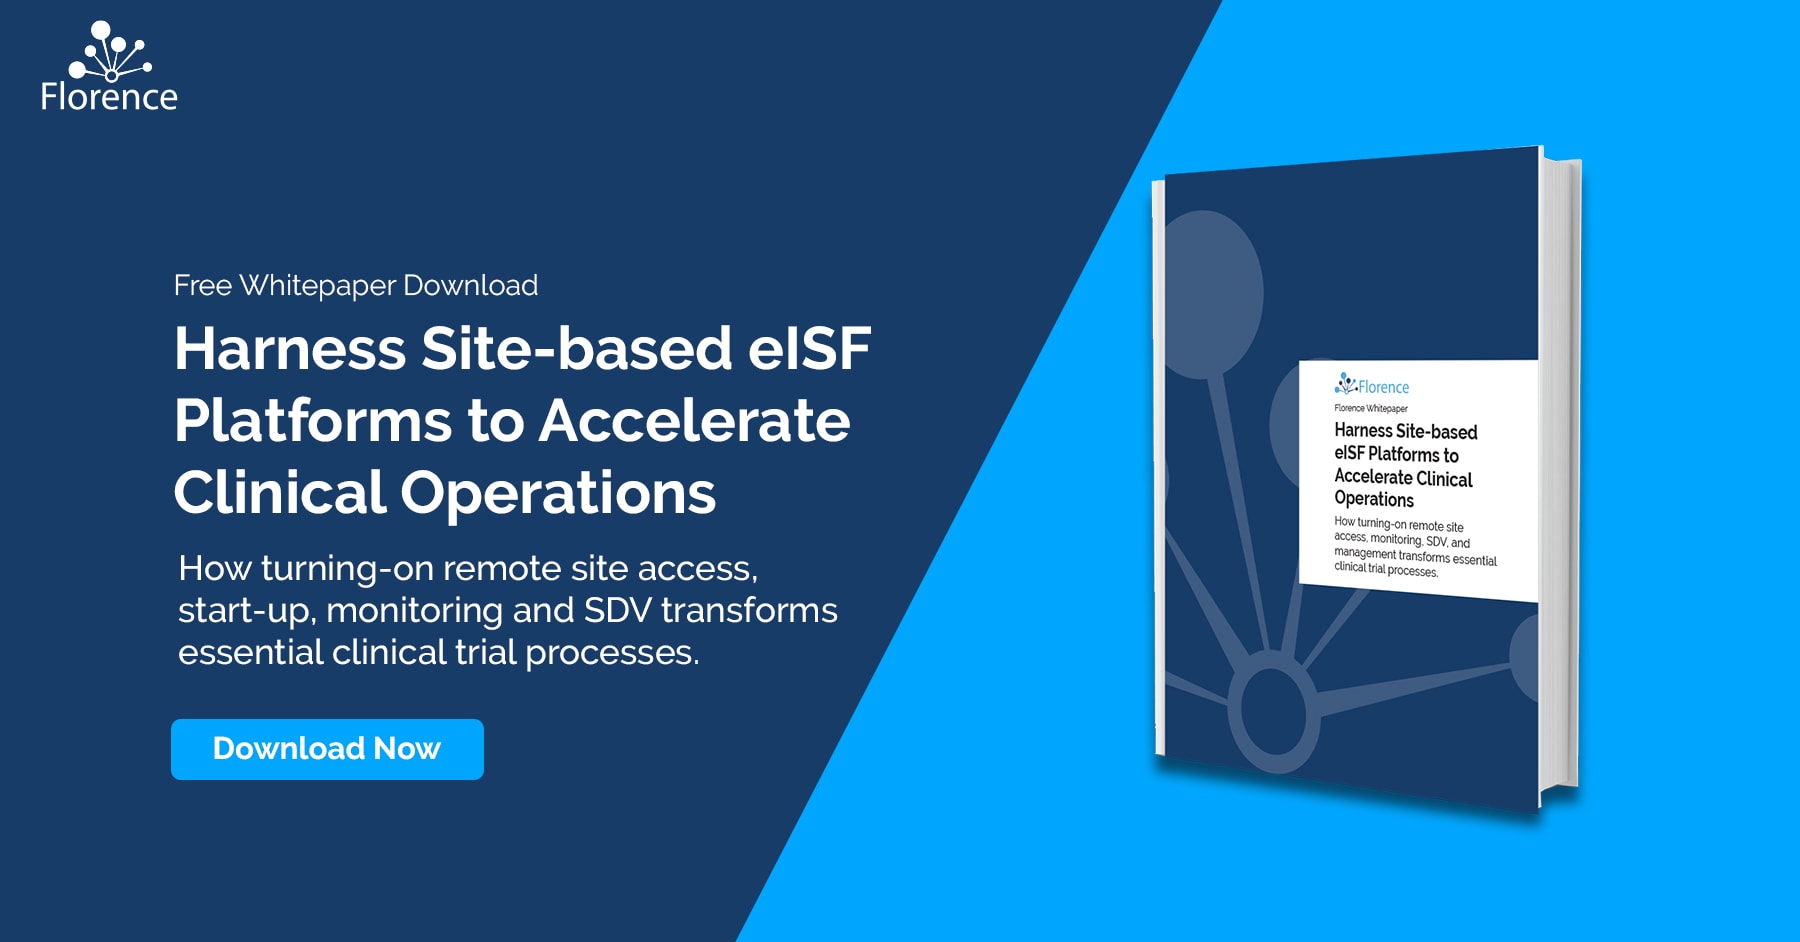 Harness Site-based eISF Platforms to Accelerate Clinical Operations